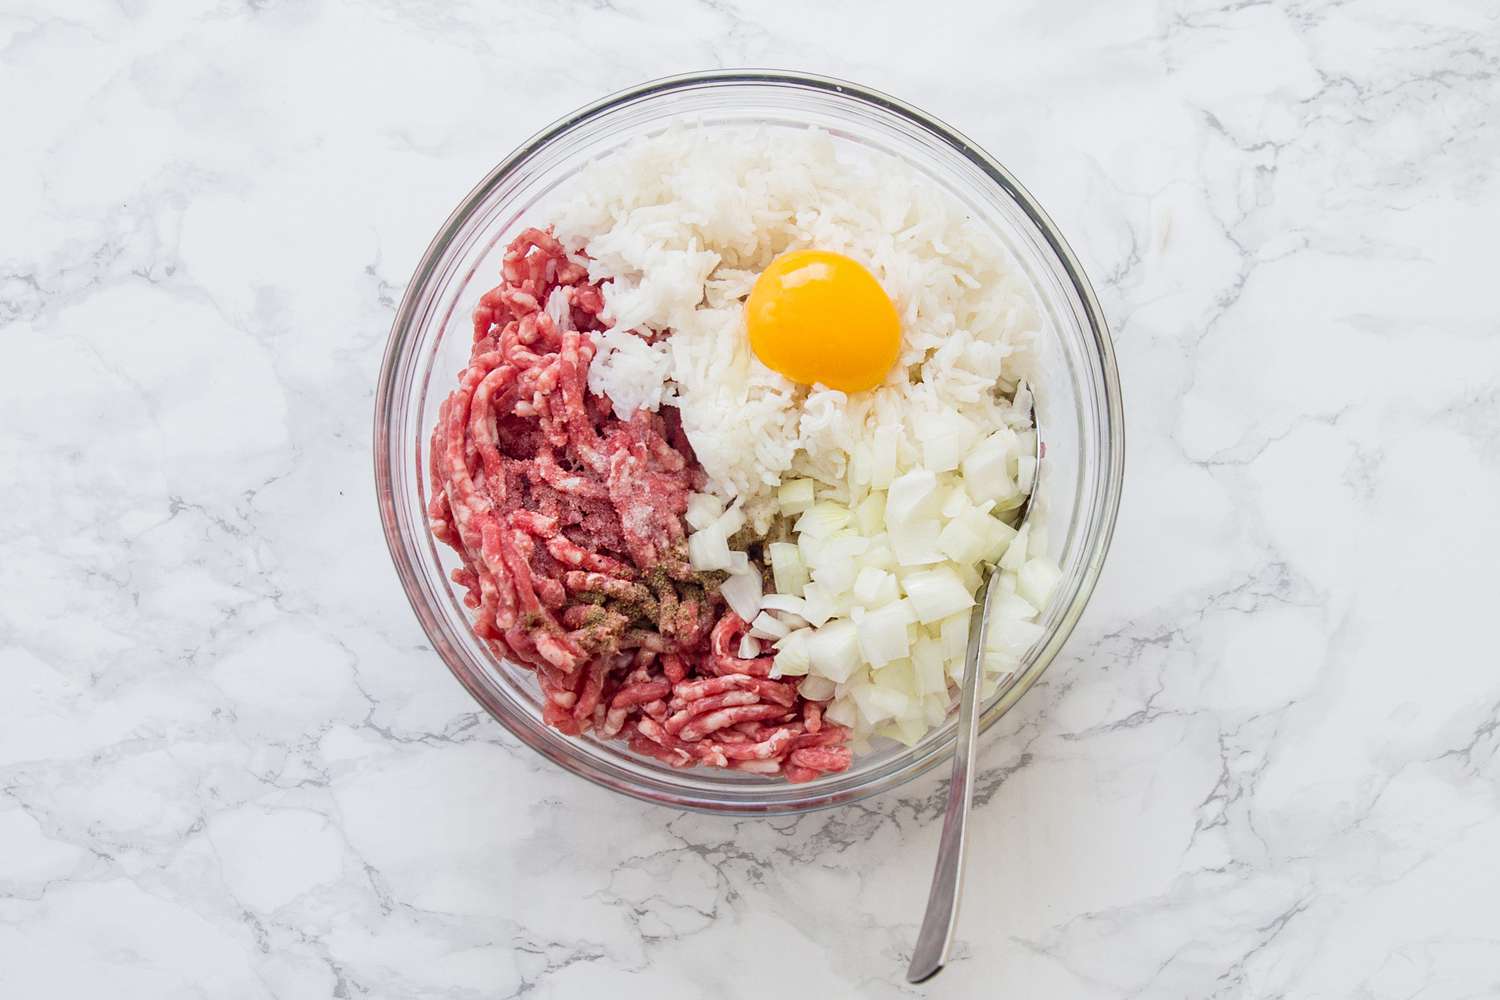 Ground beef, rice, onion, egg, milk, salt, and pepper in a glass bowl